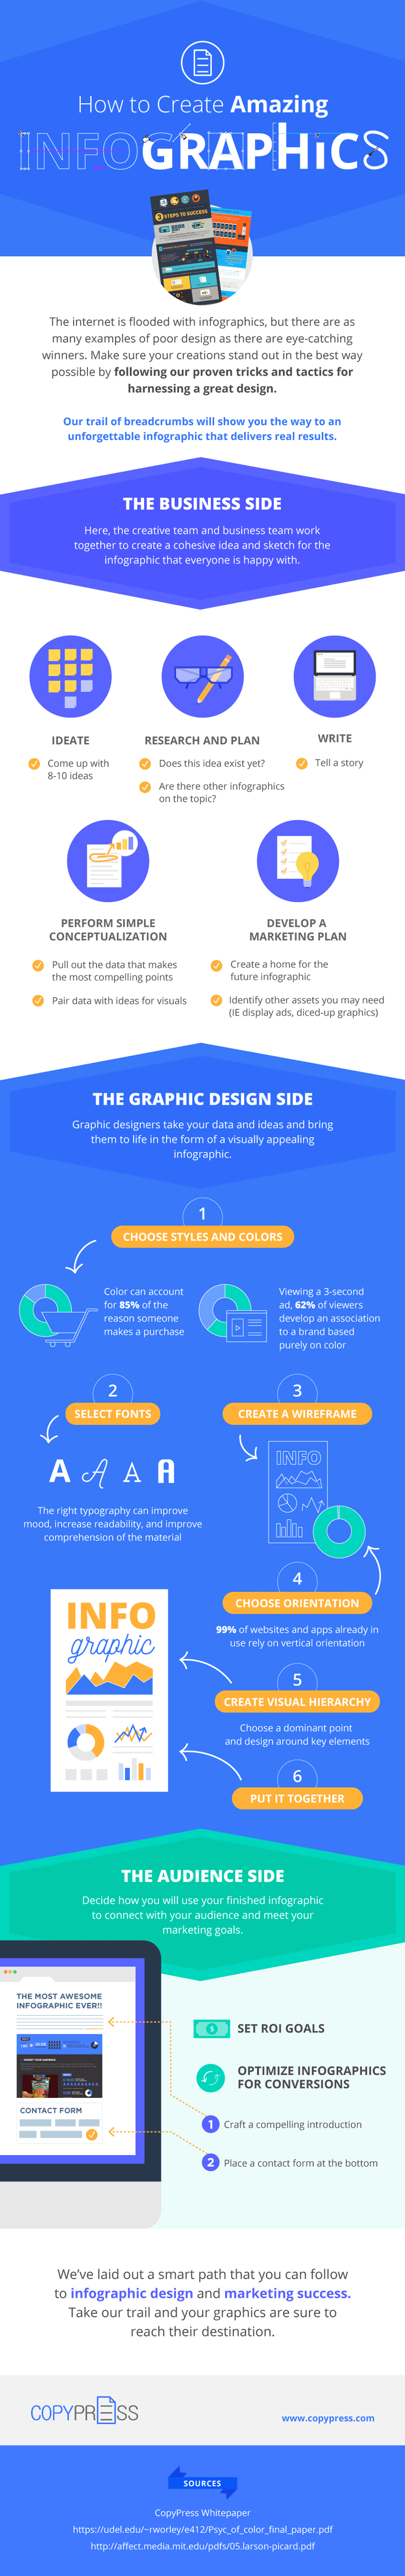 How to Create Awesome Infographics Without Being a Designer - Business 2 Community